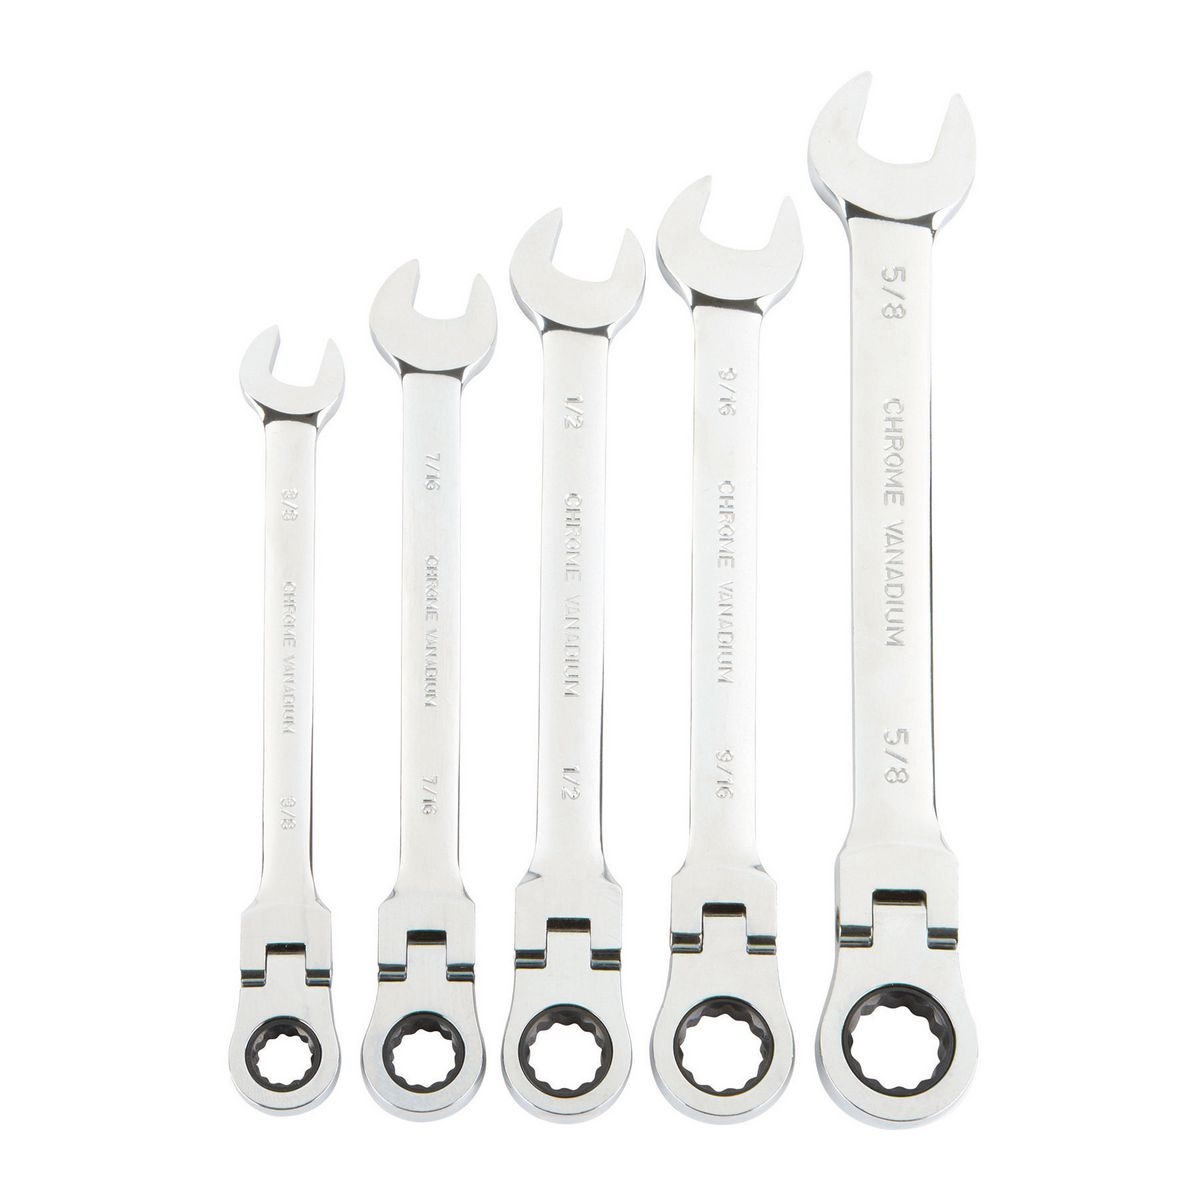 PITTSBURGH SAE Flex-Head Combination Ratcheting Wrench Set 5 Pc. - Item 60591 / 61657 / 66087 / 93790 / 96421